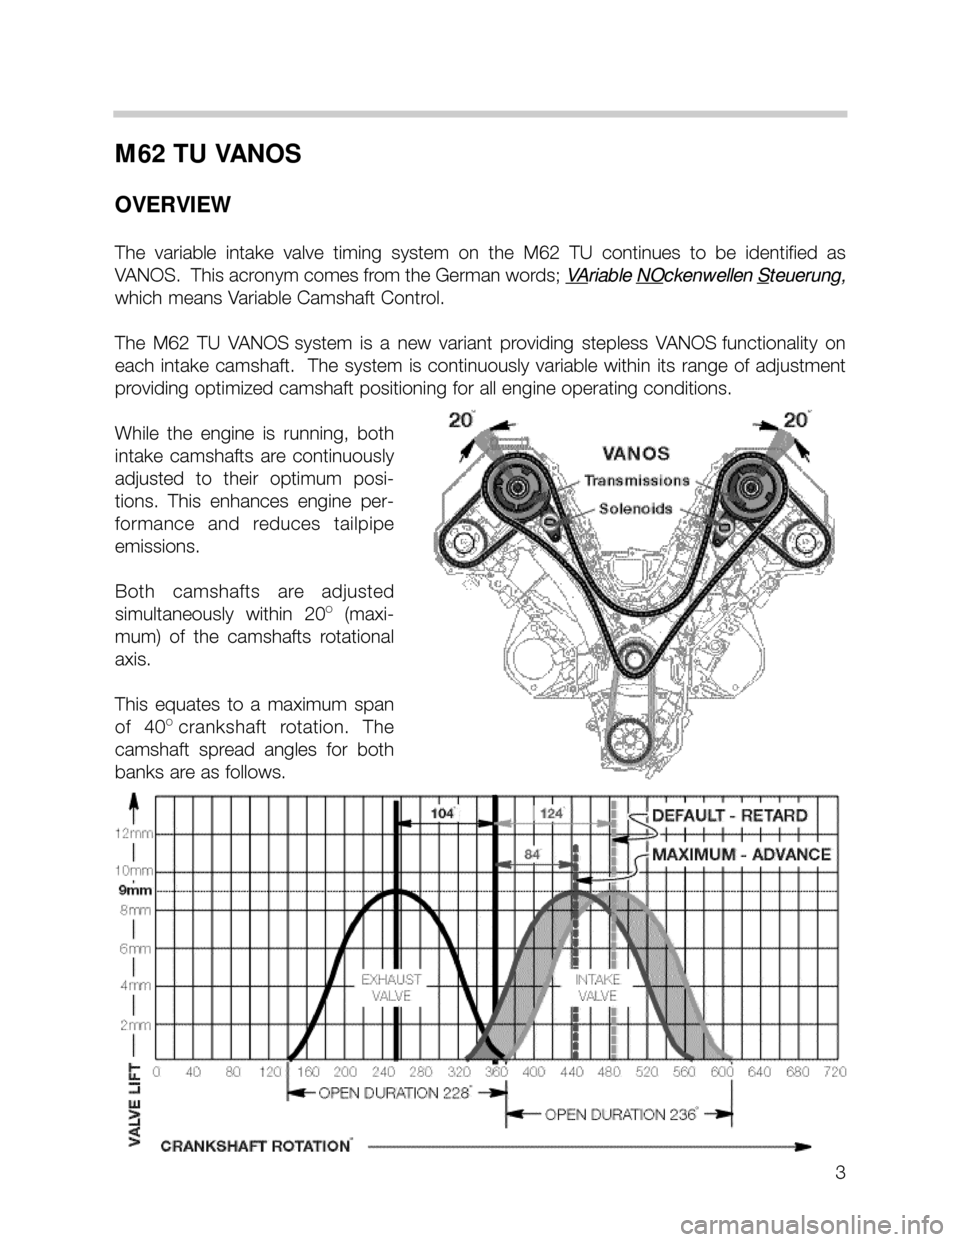 BMW X5 2002 E53 M62TU Engine Workshop Manual 3
M62 TU VANOS
OVERVIEW
The  variable  intake  valve  timing  system  on  the  M62  TU  continues  to  be  identified  as
VANOS.  This acronym comes from the German words; V
Ariable NOckenwellen Steue